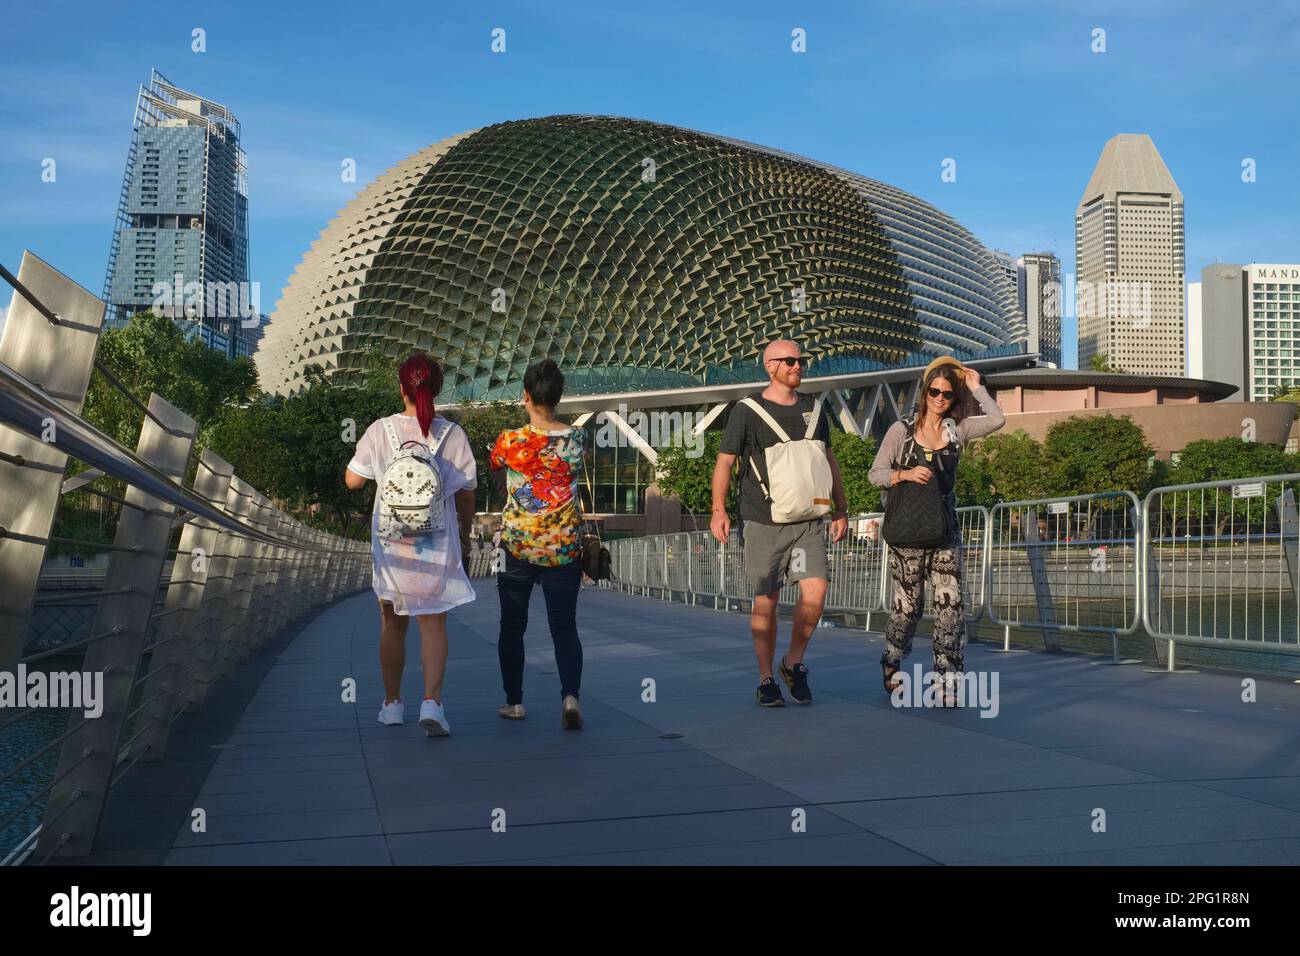 Foreign tourists walking on Jubilee Bridge over Marina Bay, Singapore, the iconic Theatres by the Bay - locally nicknamed 'The Durian' - in the b/g Stock Photo